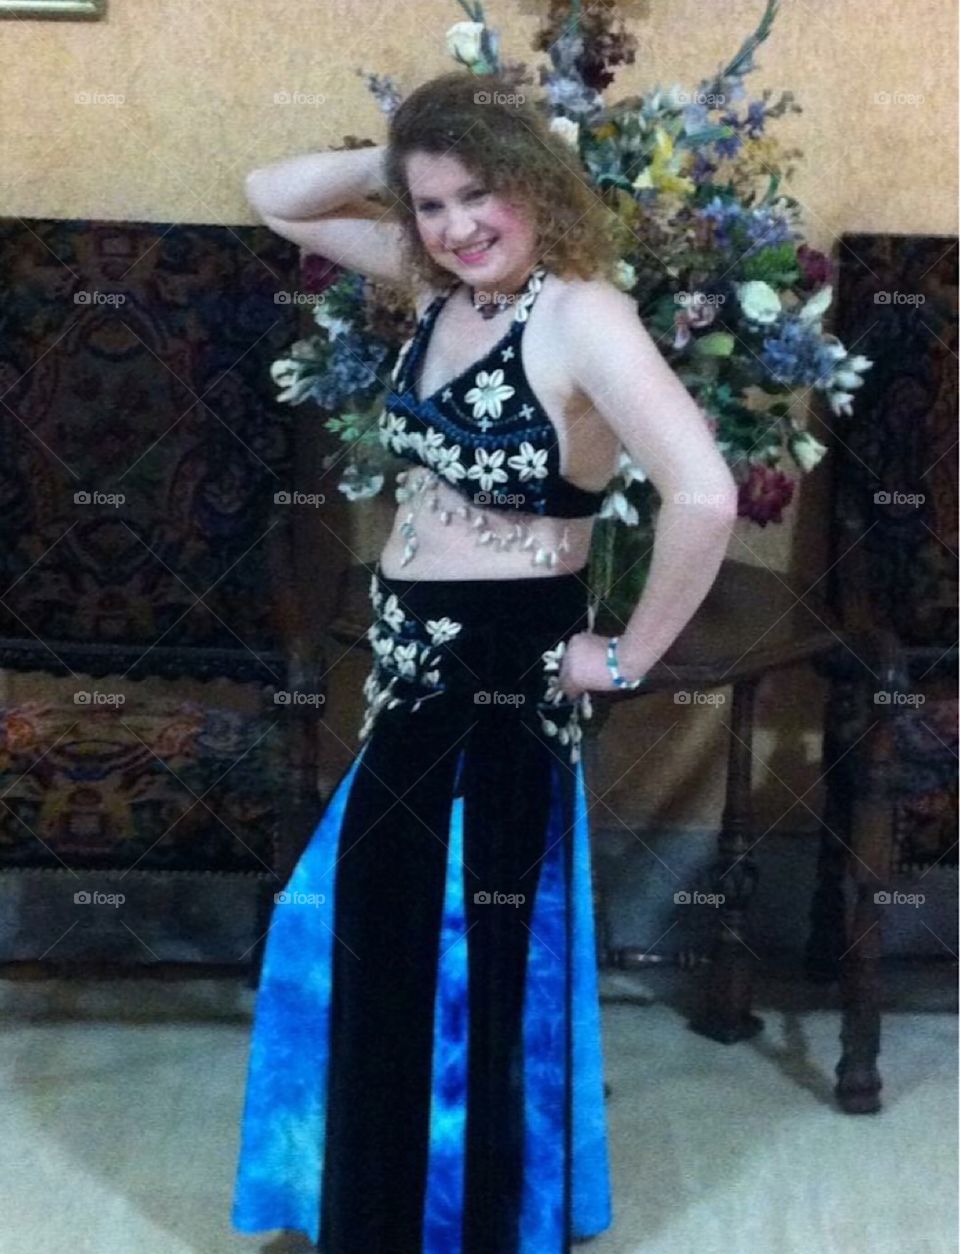 I’m a Belly dancer. Dancing at the Masonic Temple in SLC. I love dancing and love cultural styles.